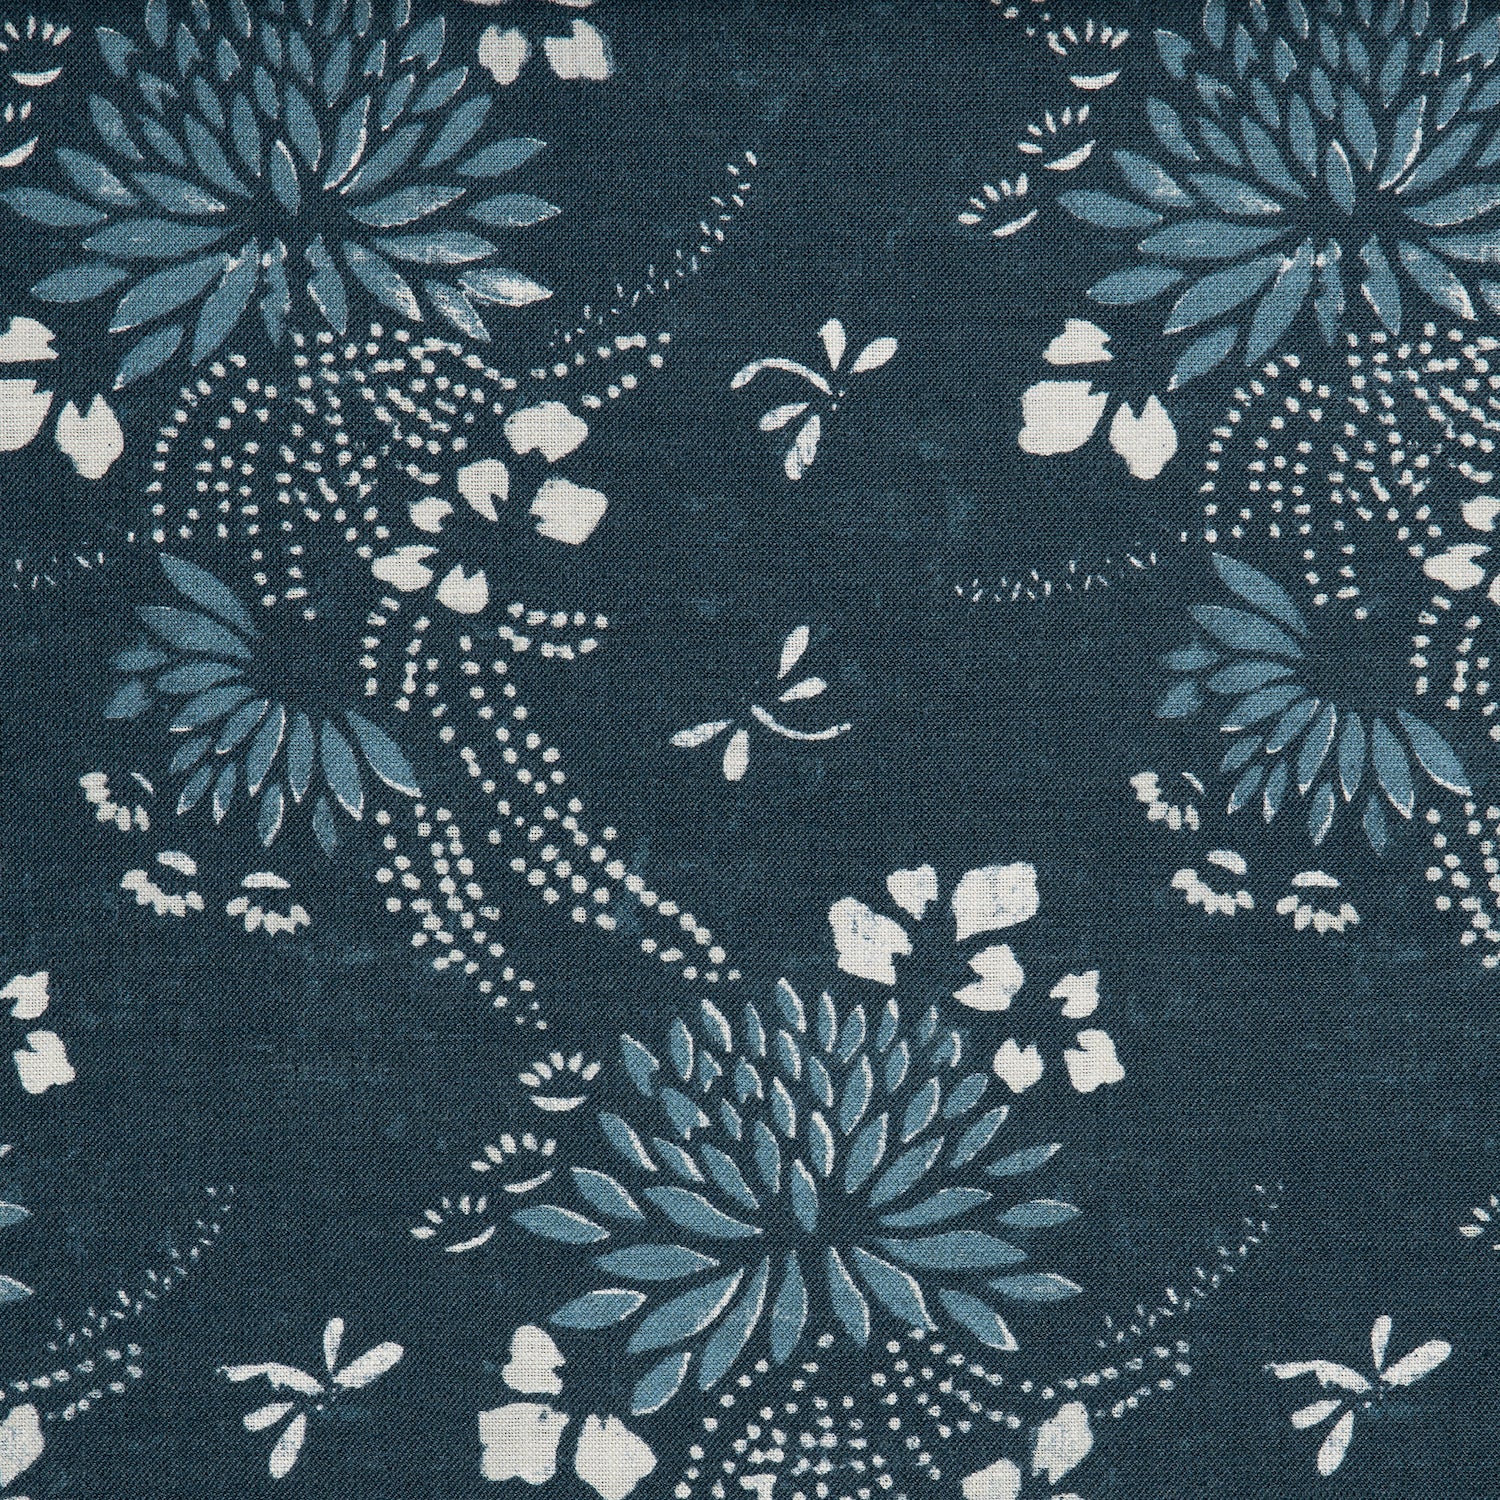 Detail of a linen fabric in a floral and dot pattern in blue and white on a navy field.